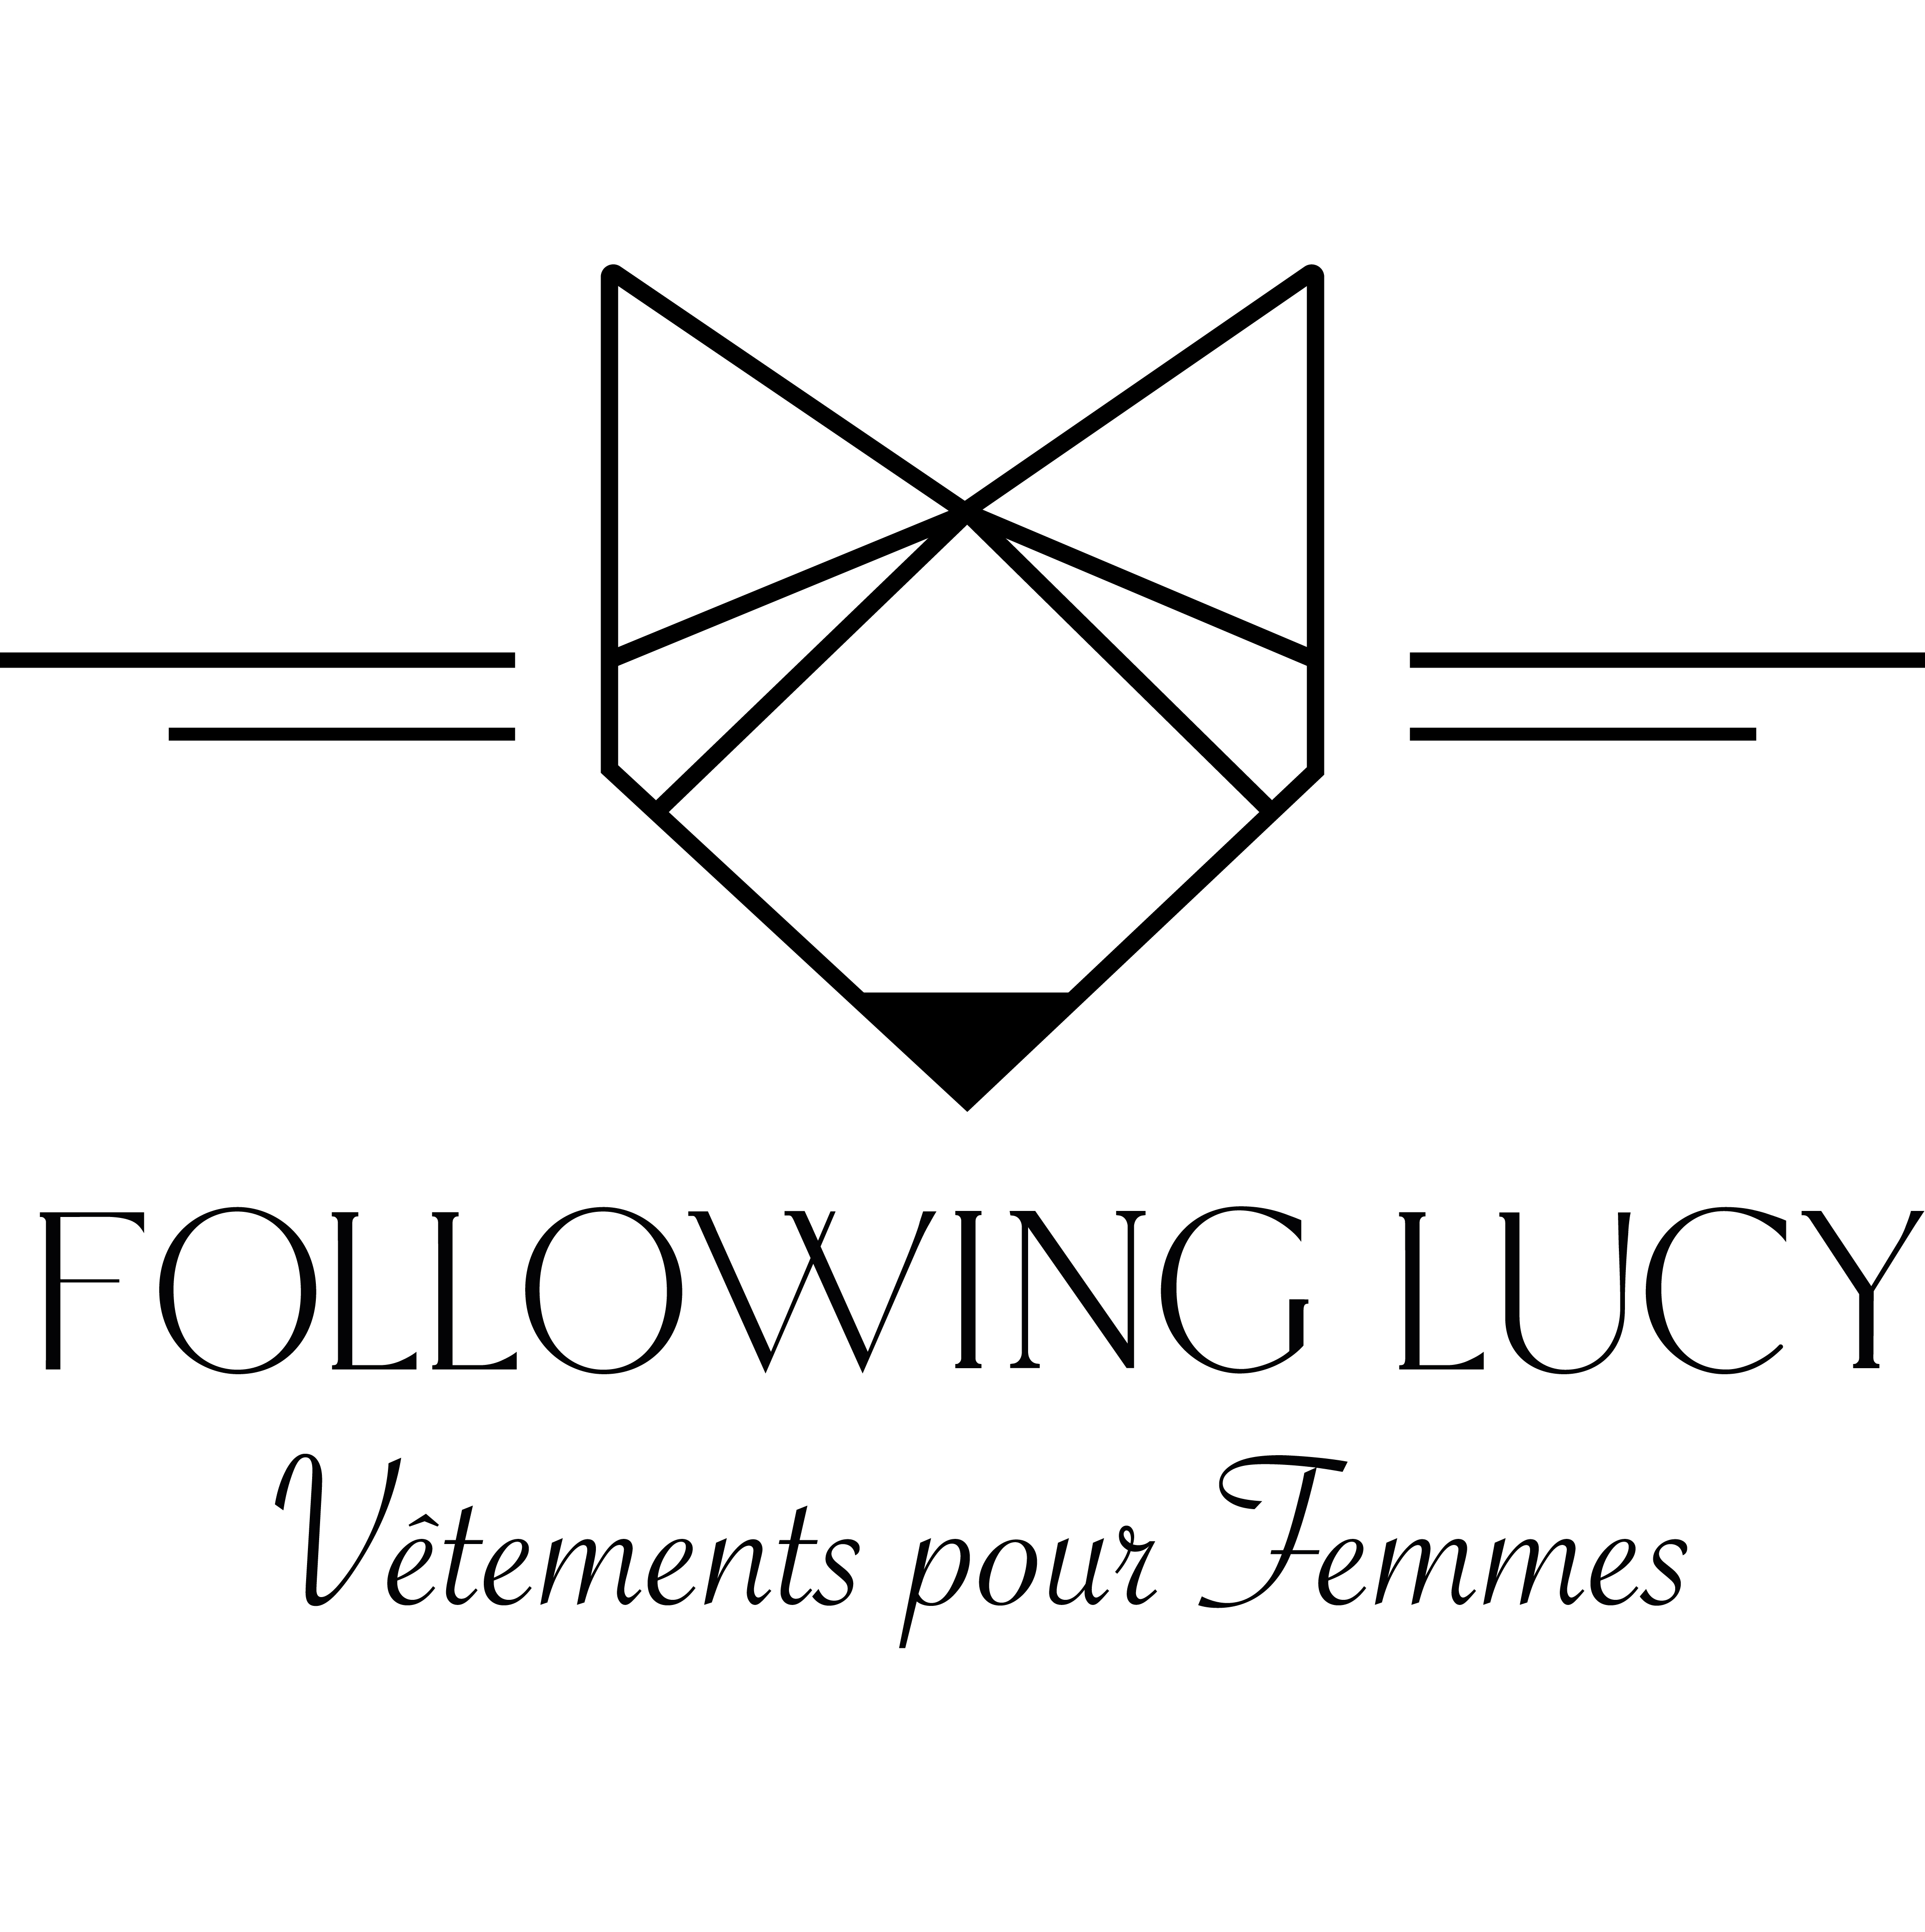 Following Lucy